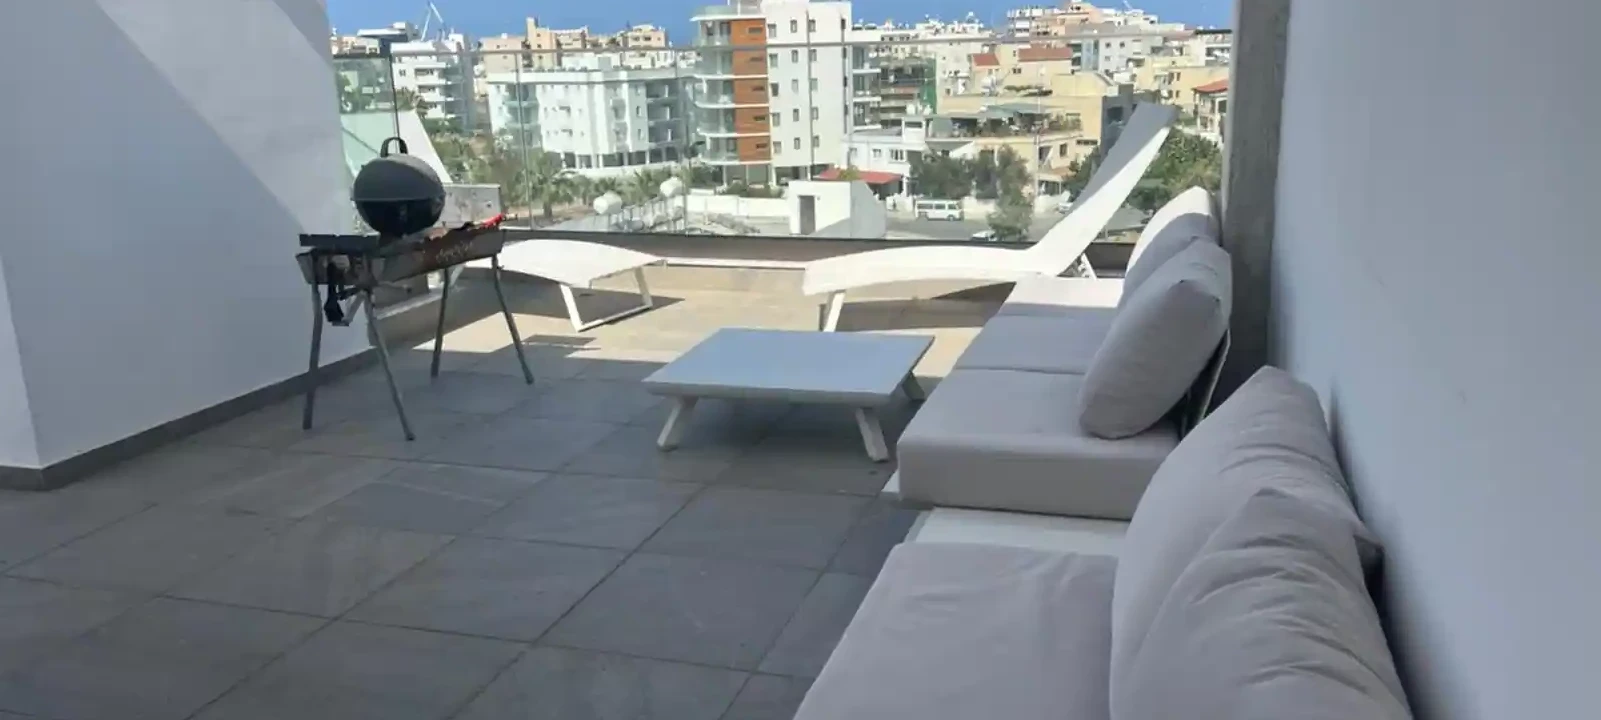 3-bedroom penthouse to rent €1.400, image 1